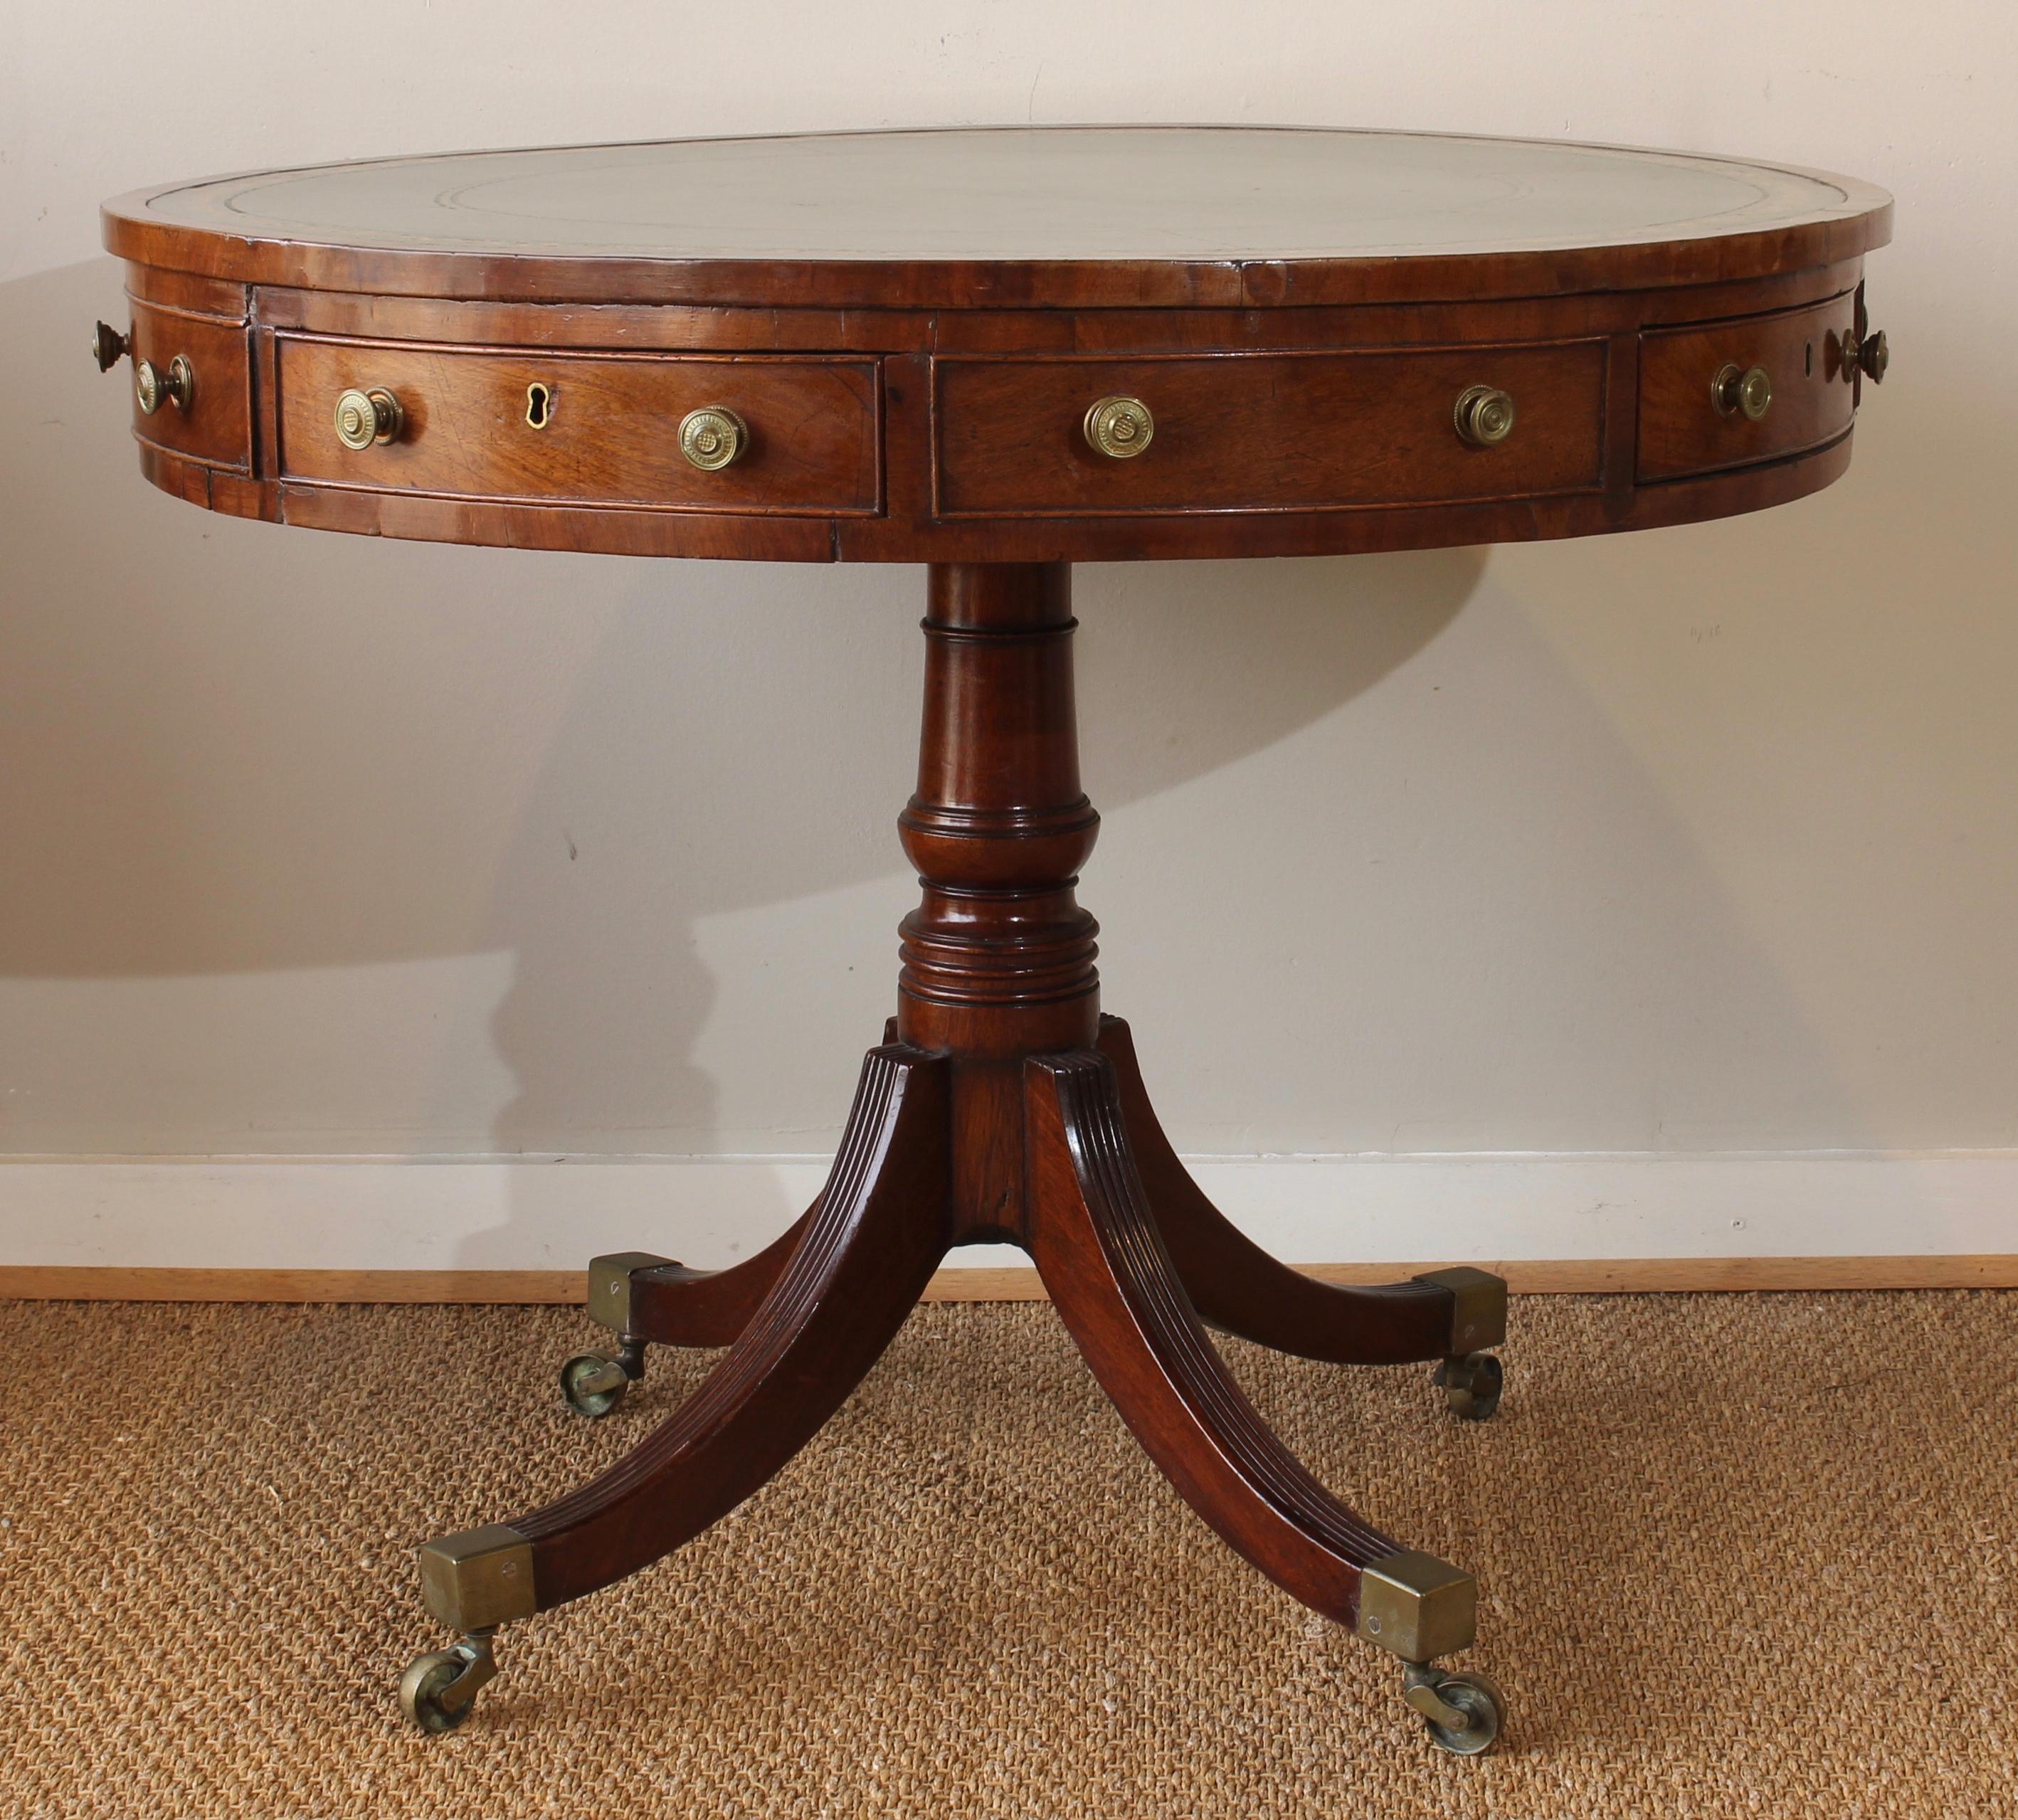 An elegant mid-19th century. English mahogany drum table of small scale with green tooled leather inset top above four working and four false drawers resting on a beautifully turned pedestal and reeded legs terminating in brass capped casters.